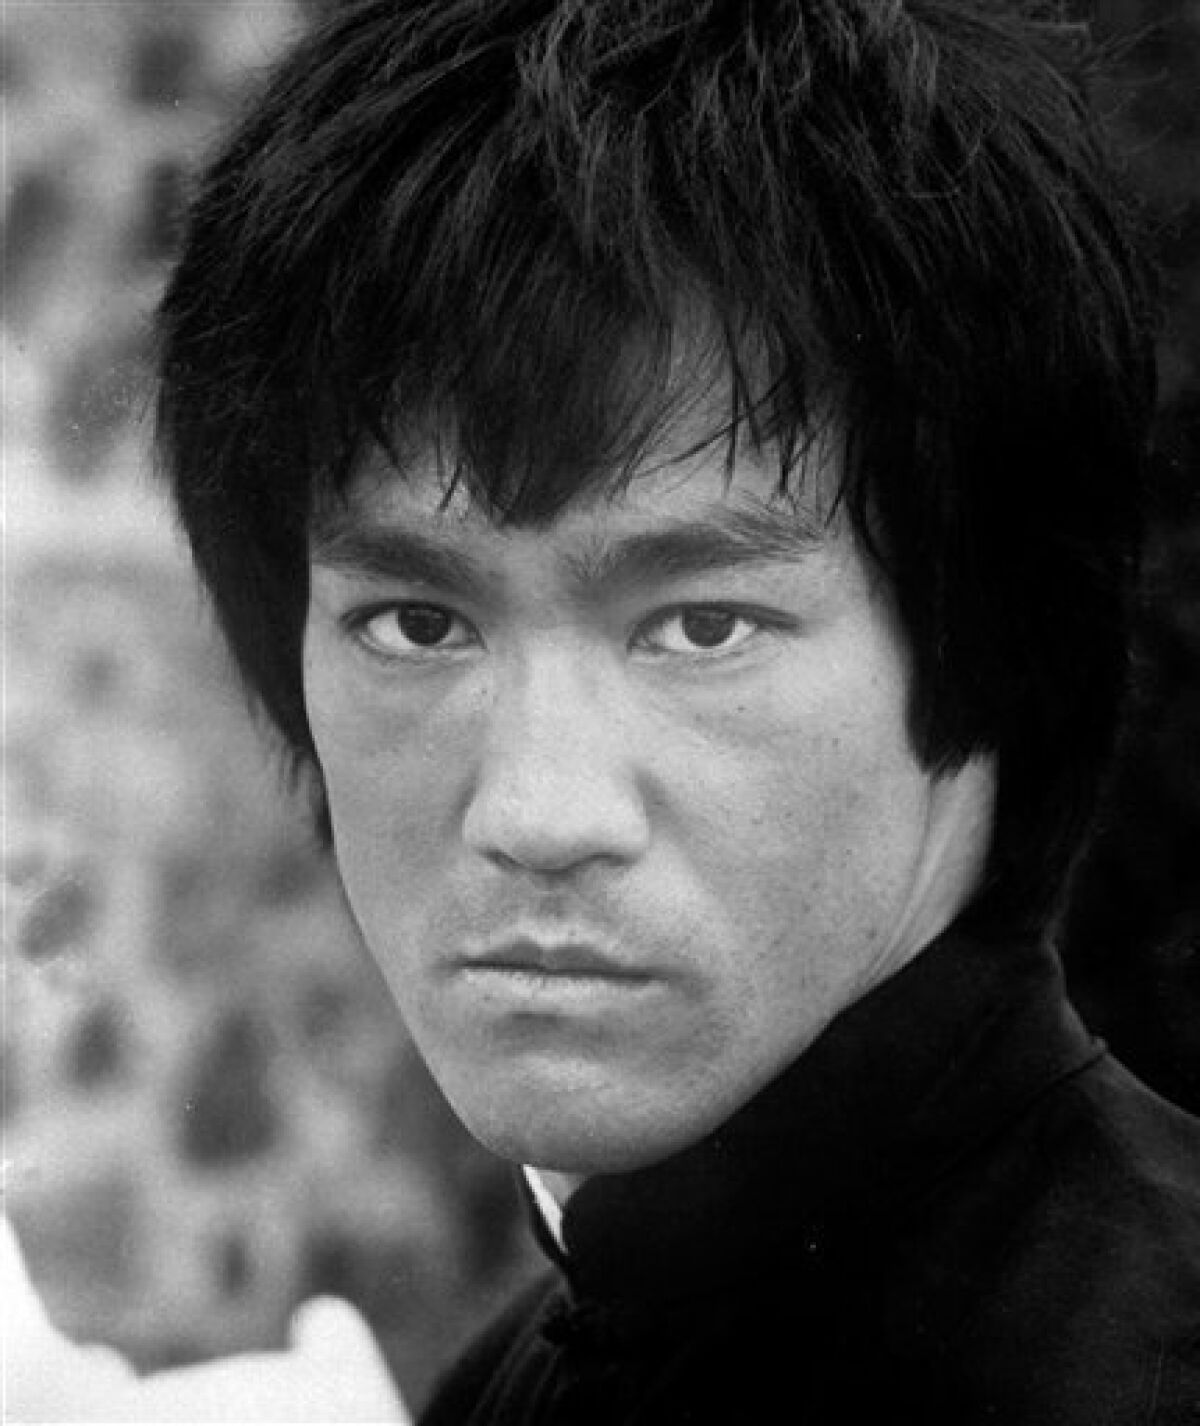 Bruce Lee's siblings authorize Chinese biopics - The San Diego Union-Tribune